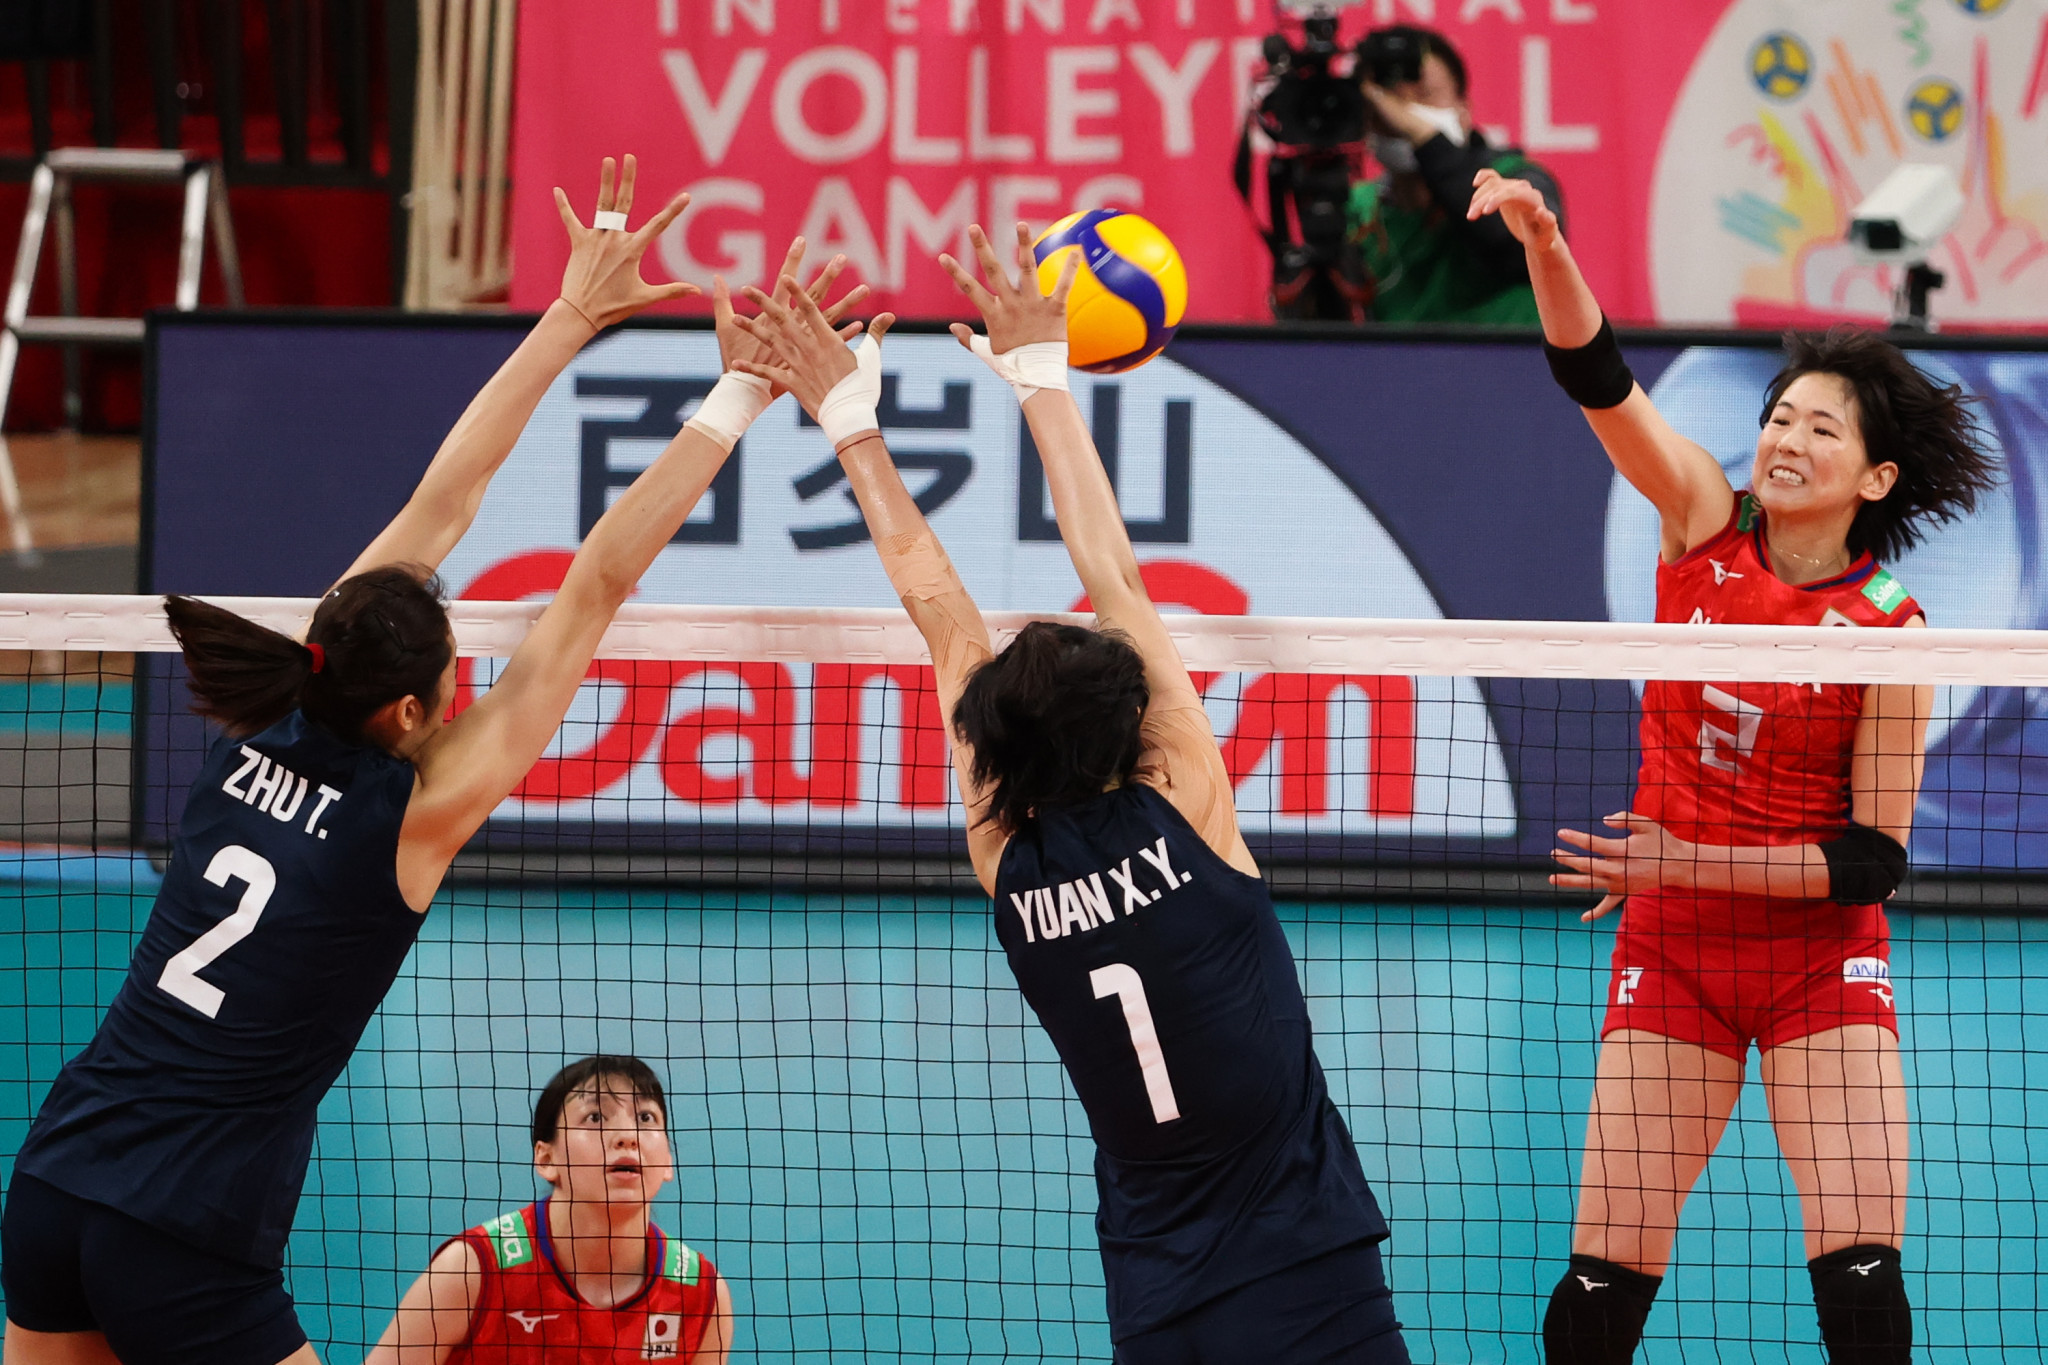 China and Japan are going head-to-head in a series of volleyball matches as part of a Tokyo 2020 test event ©Getty Images